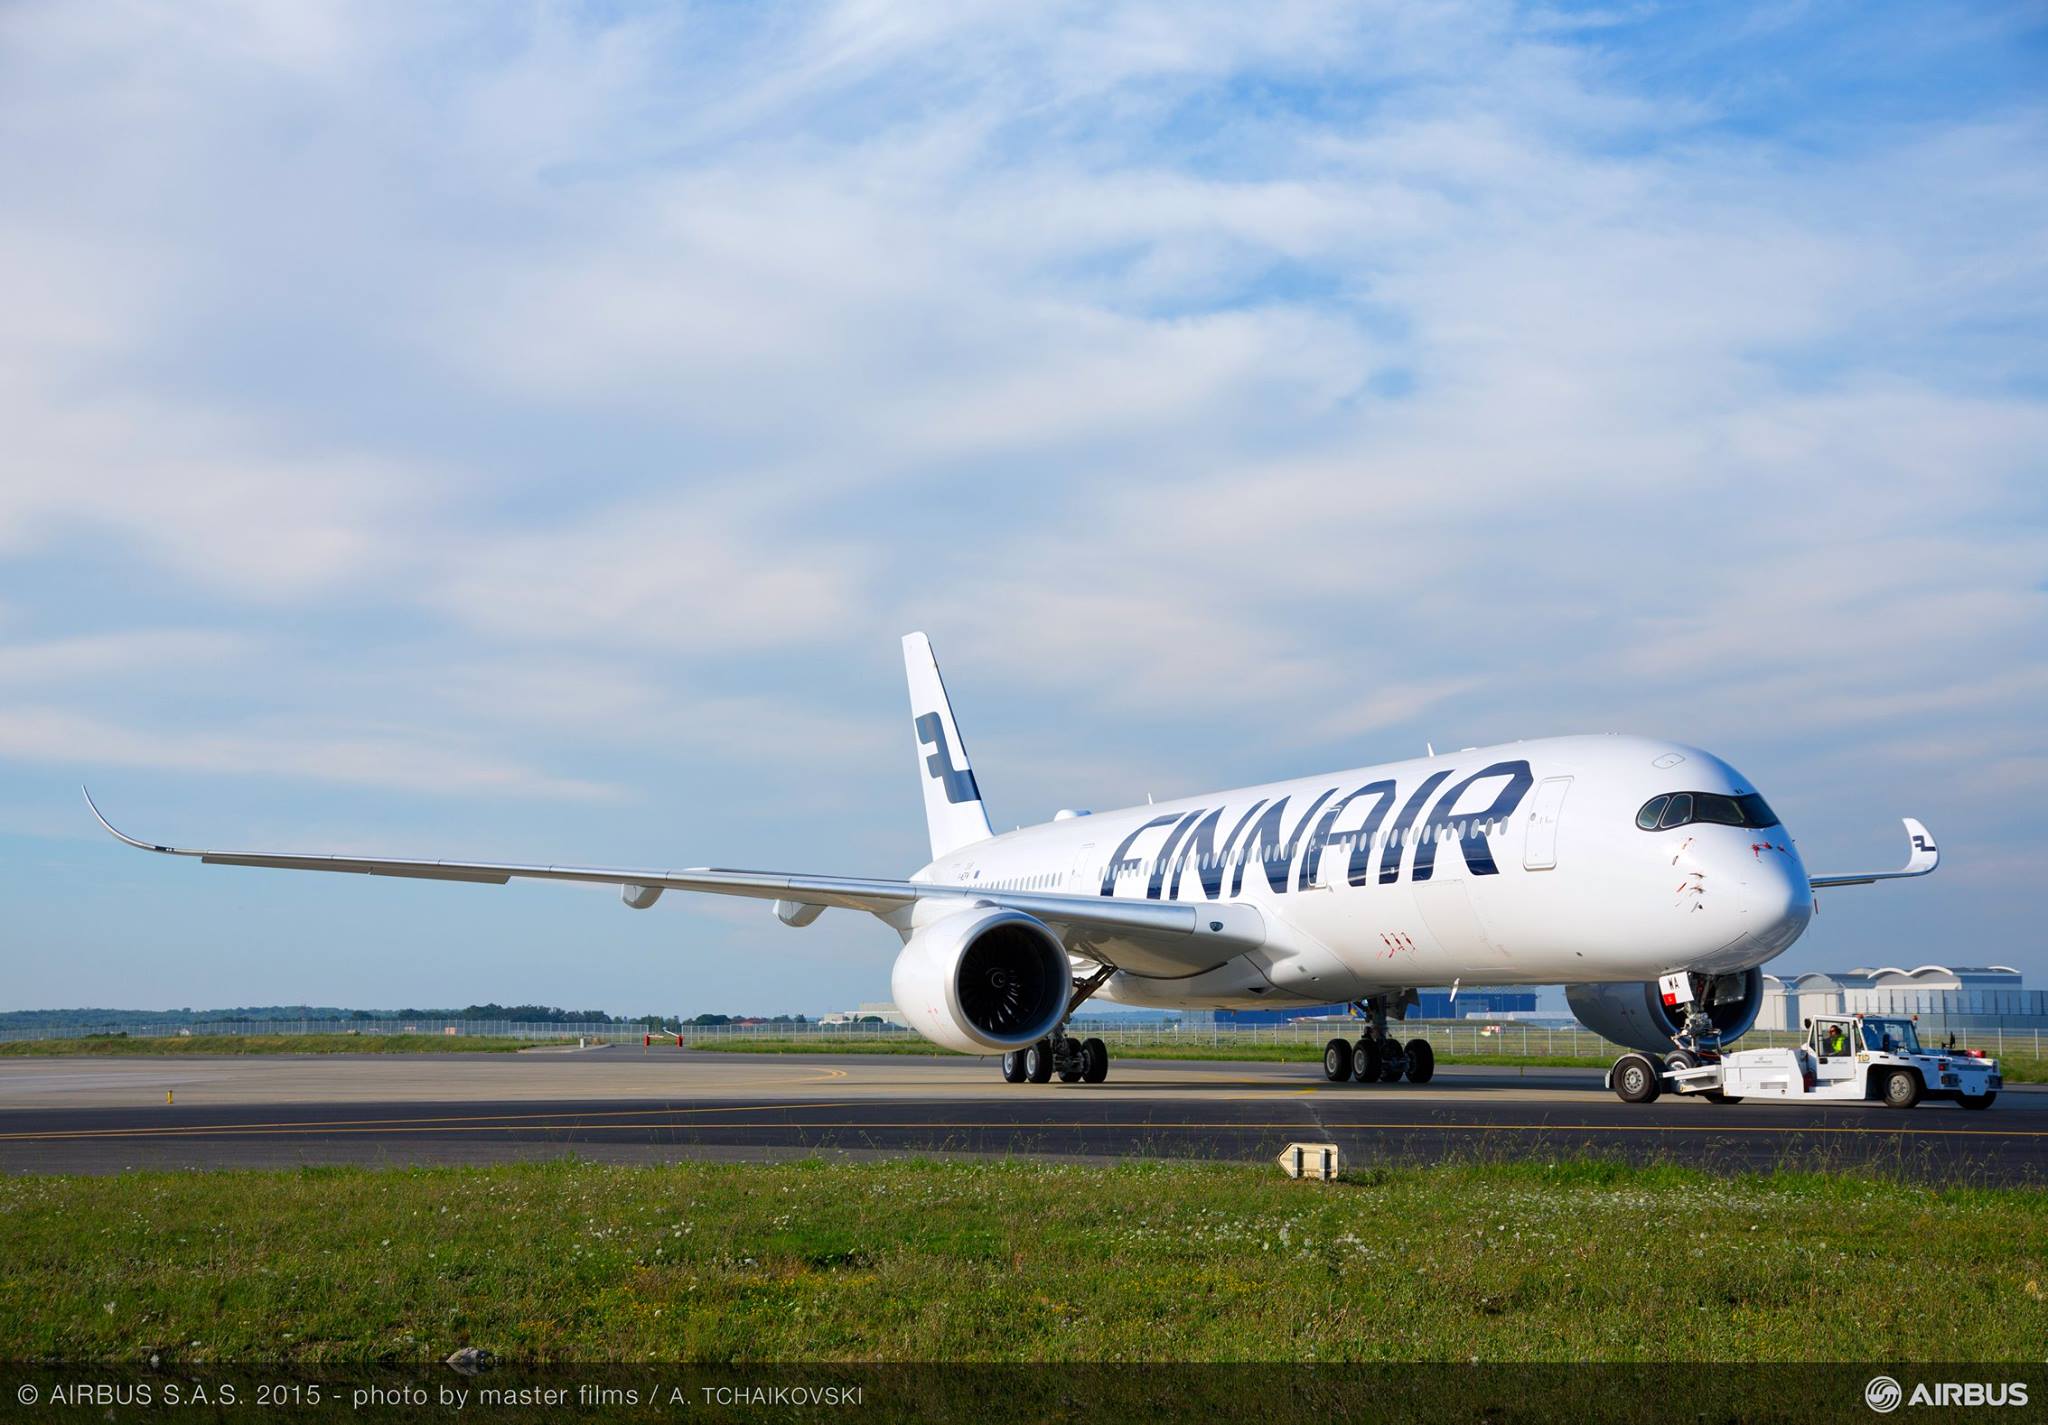 First Finnair A350 Rolled Out Of Paint Shop